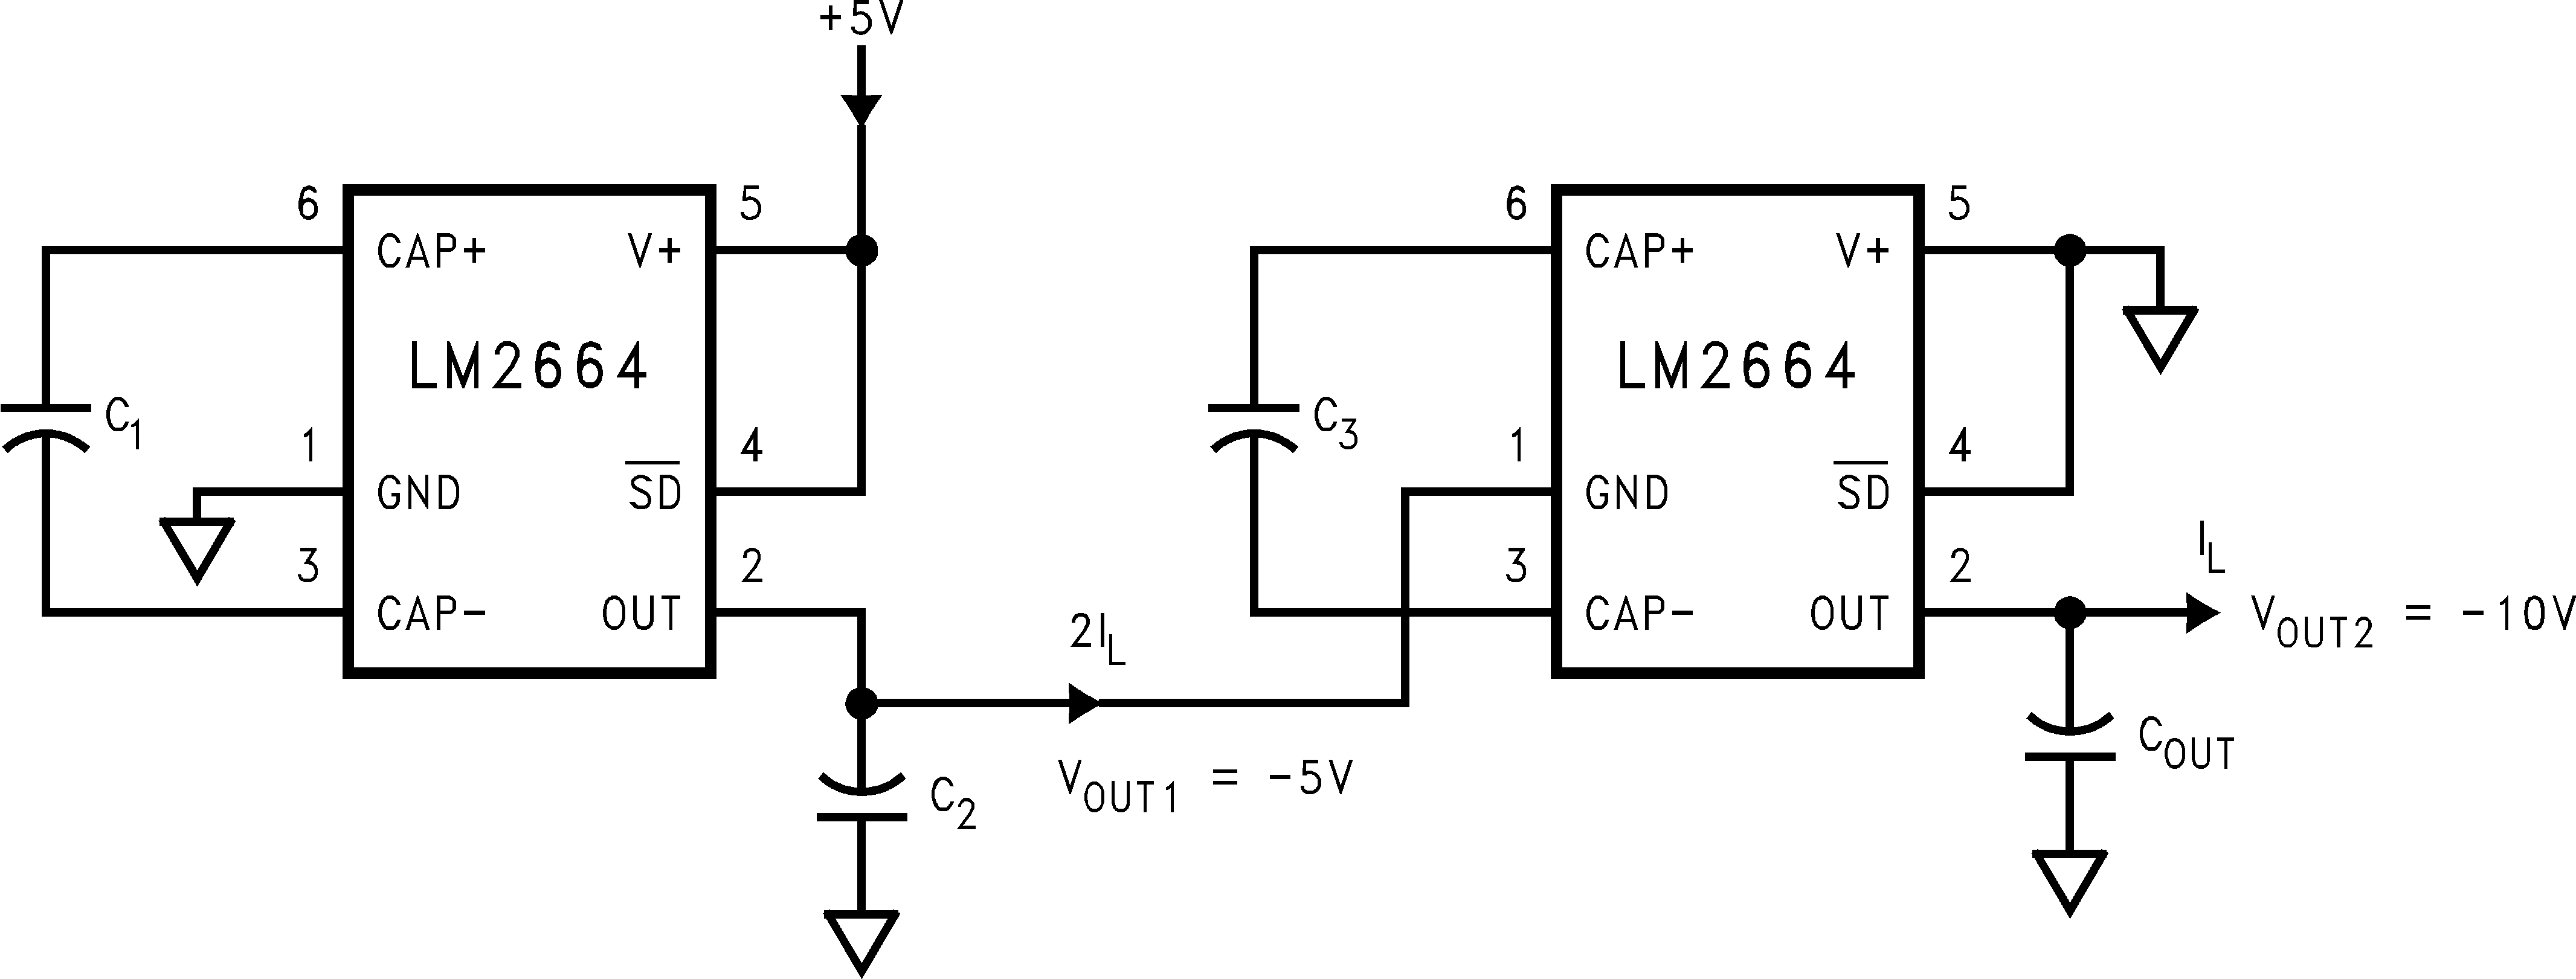 LM2664-LM2664 Switched Capacitor Voltage Converter